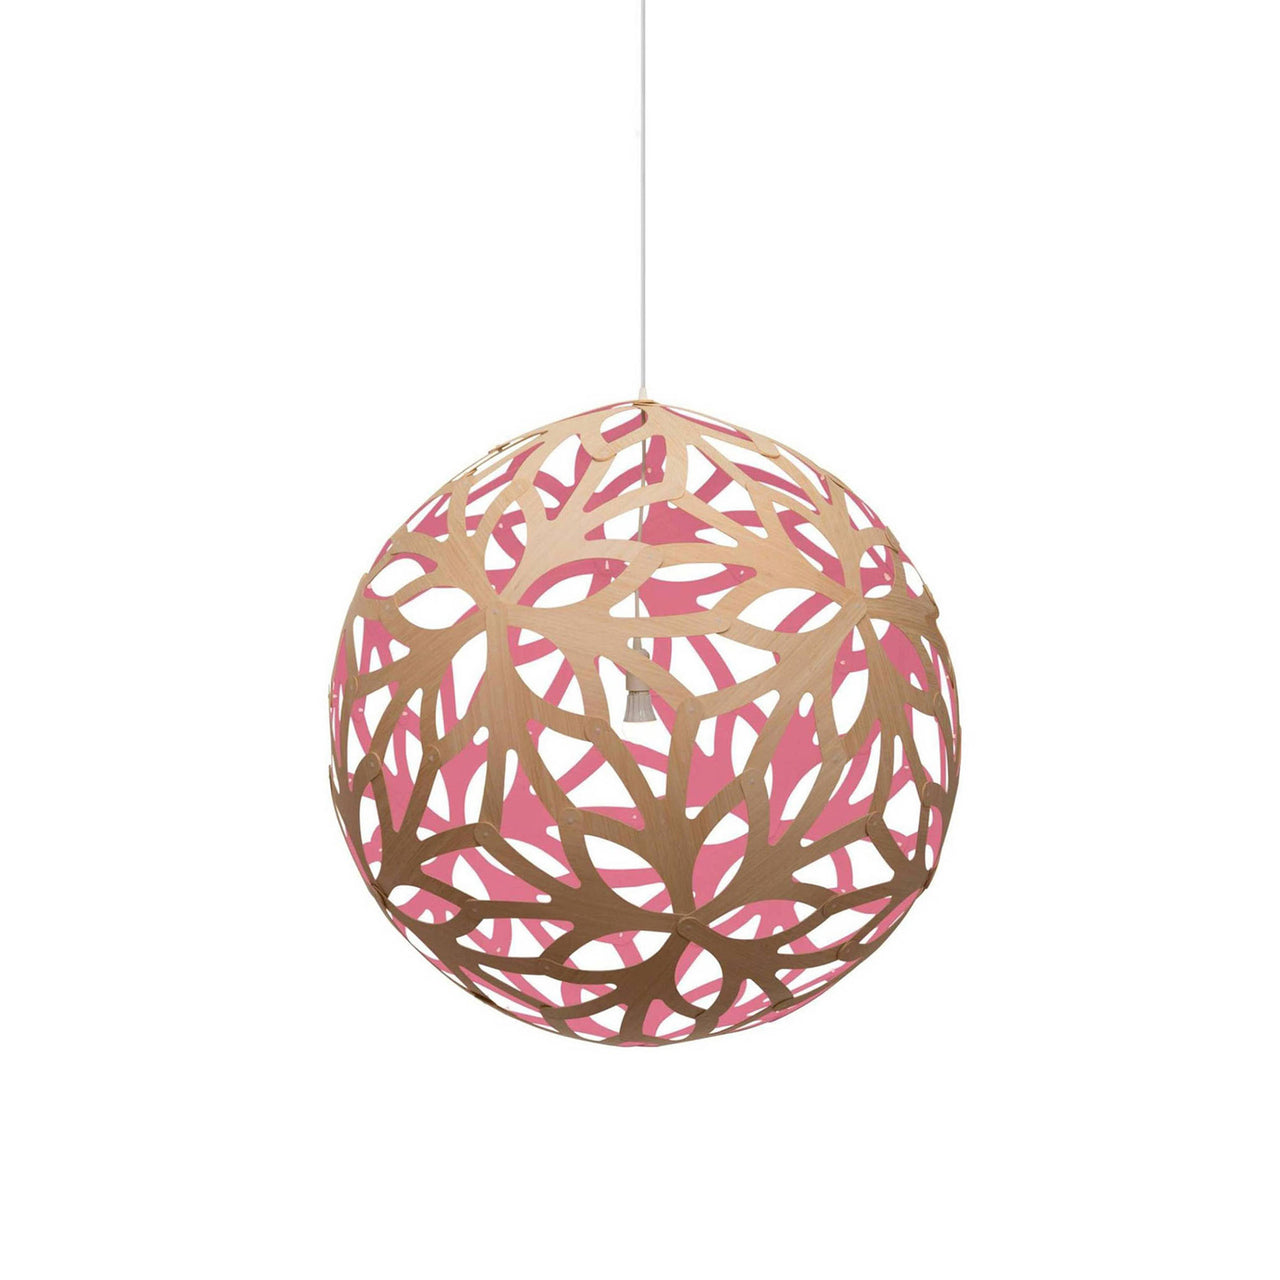 Floral Pendant Light: Large + Bamboo + Pink + White